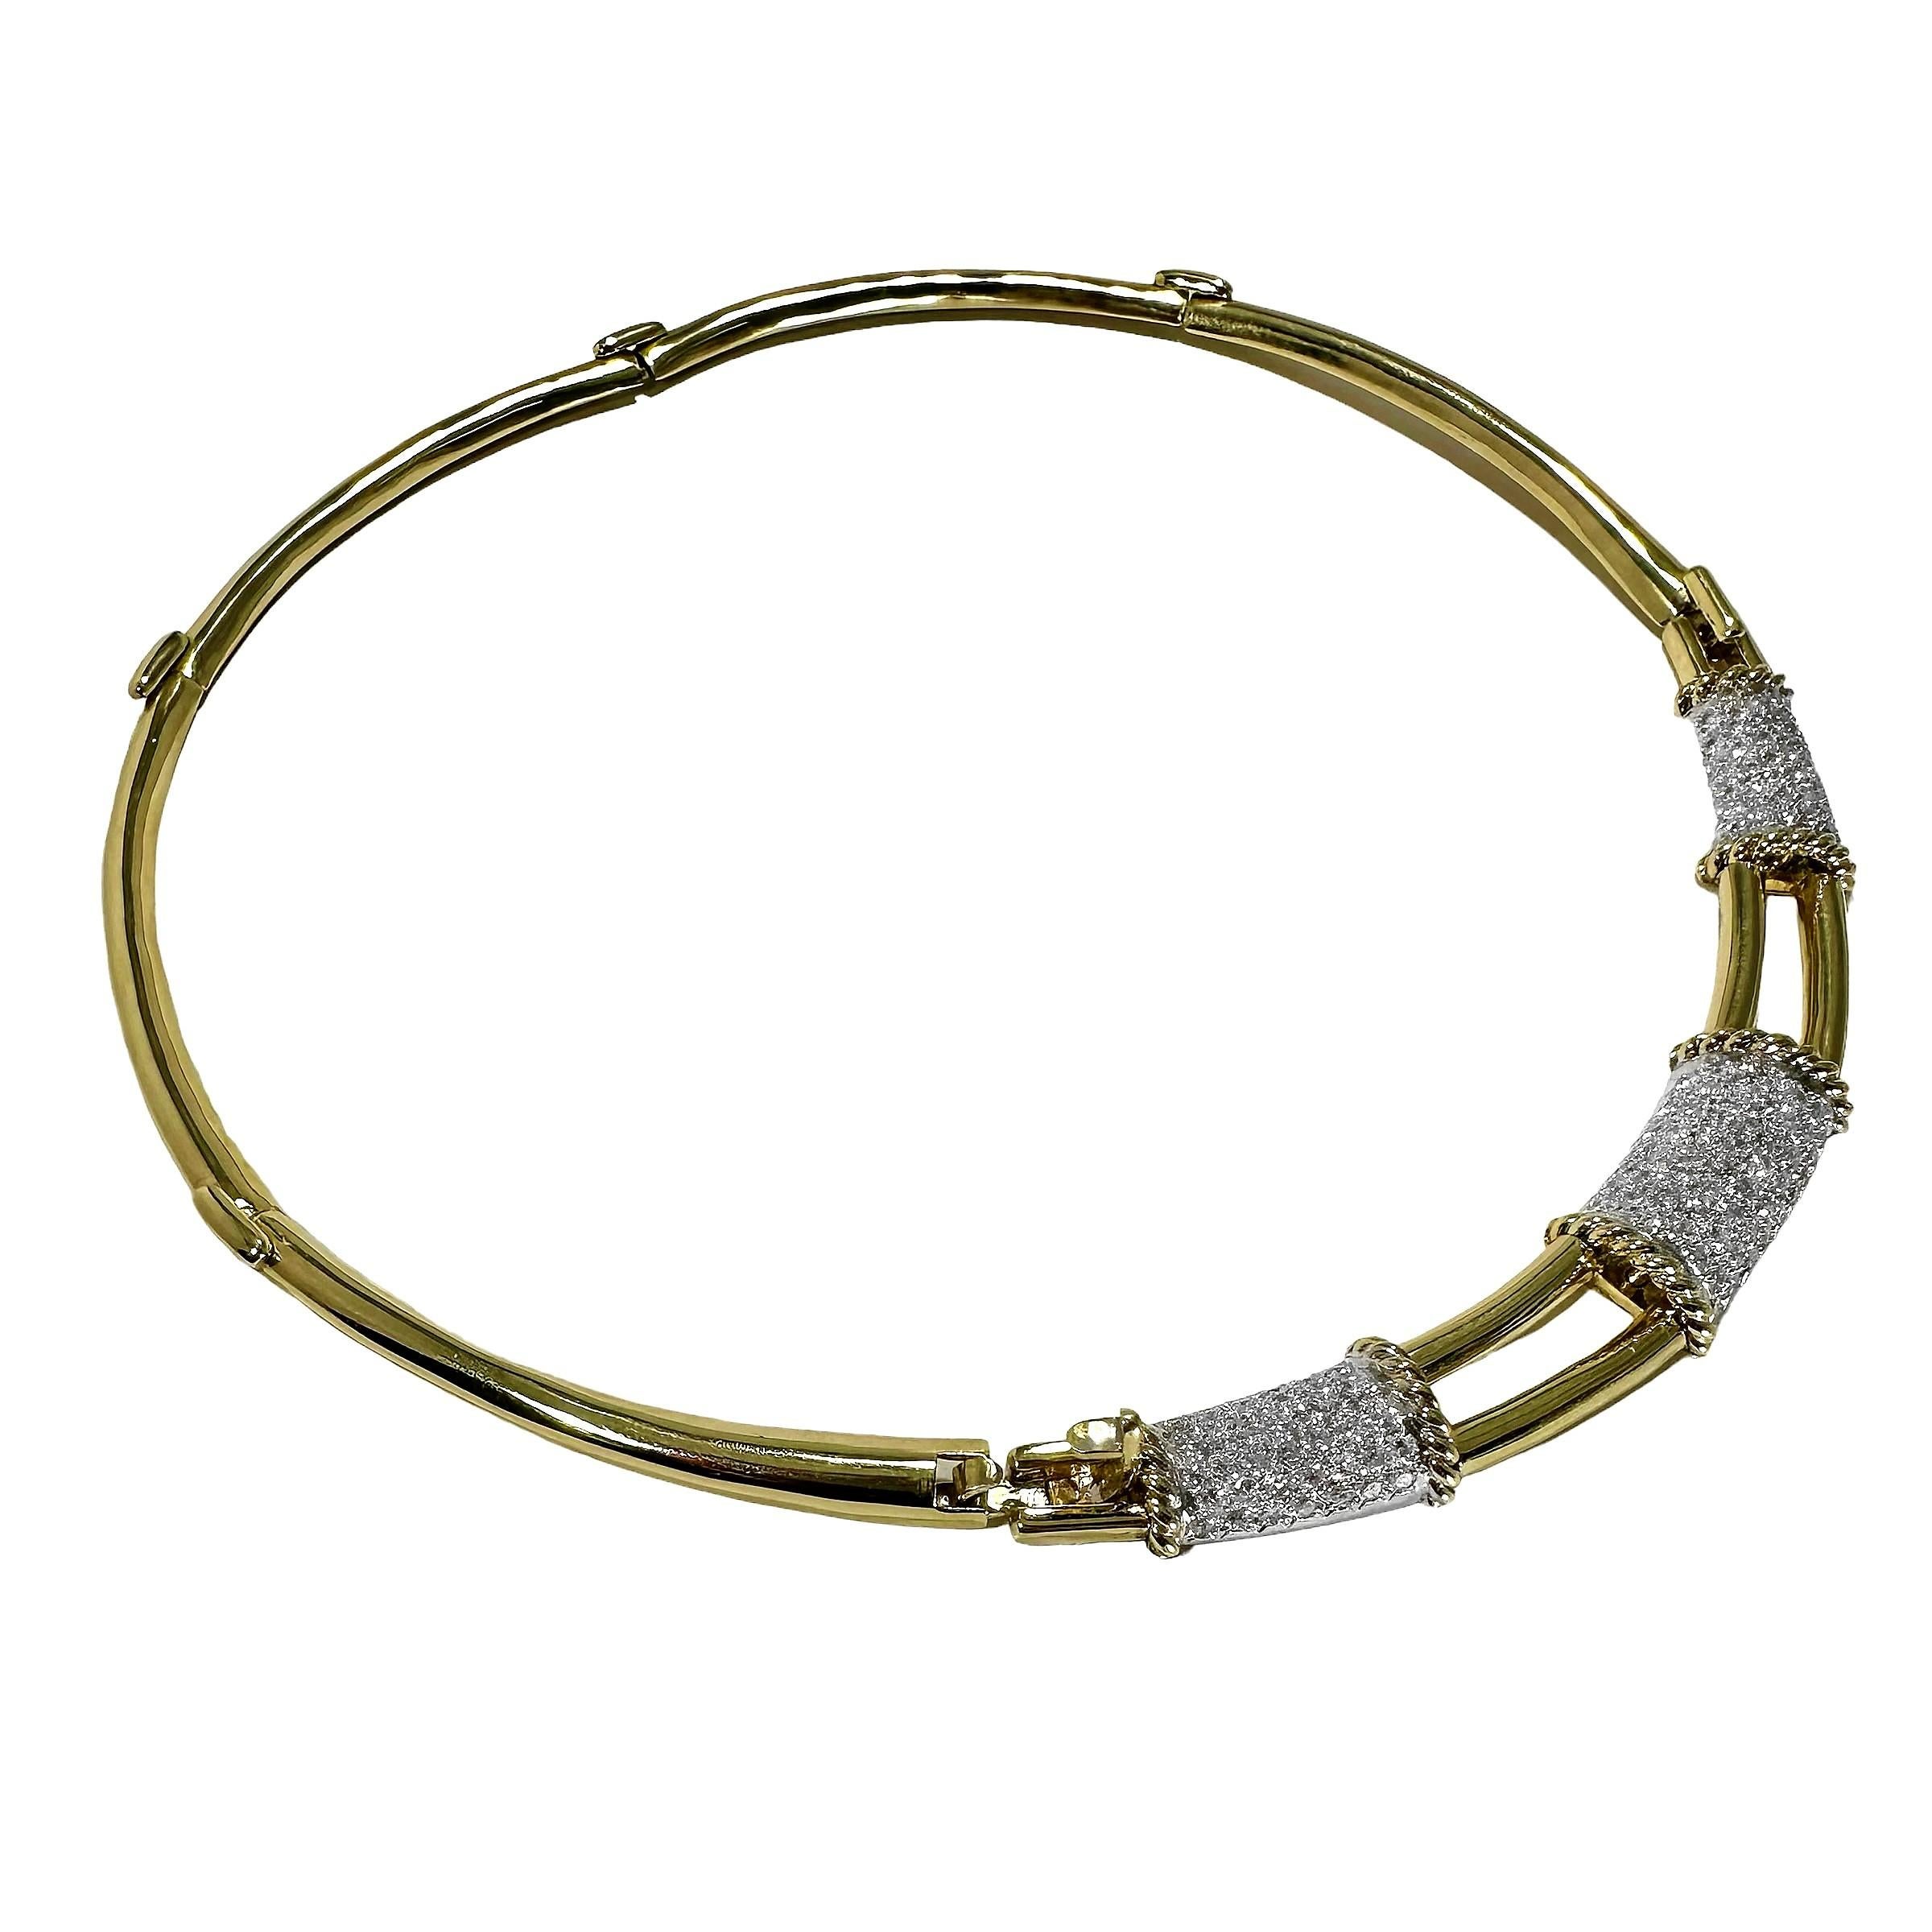 Elegant Mid-20th Century 18K Gold and Diamond Choker Necklace For Sale 1